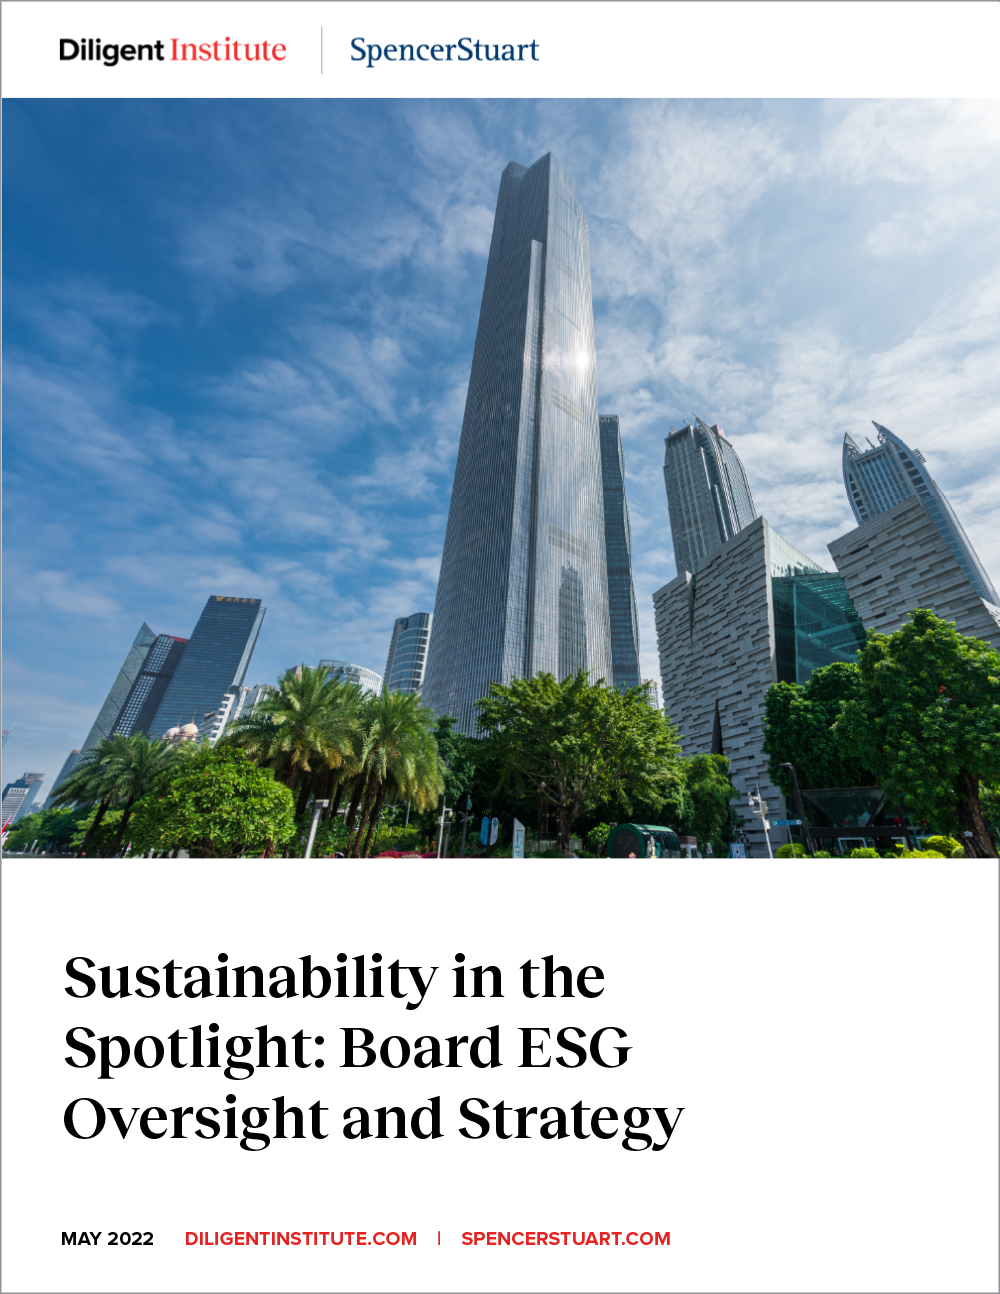 Sustainability in the Spotlight: Board ESG Oversight and Strategy report